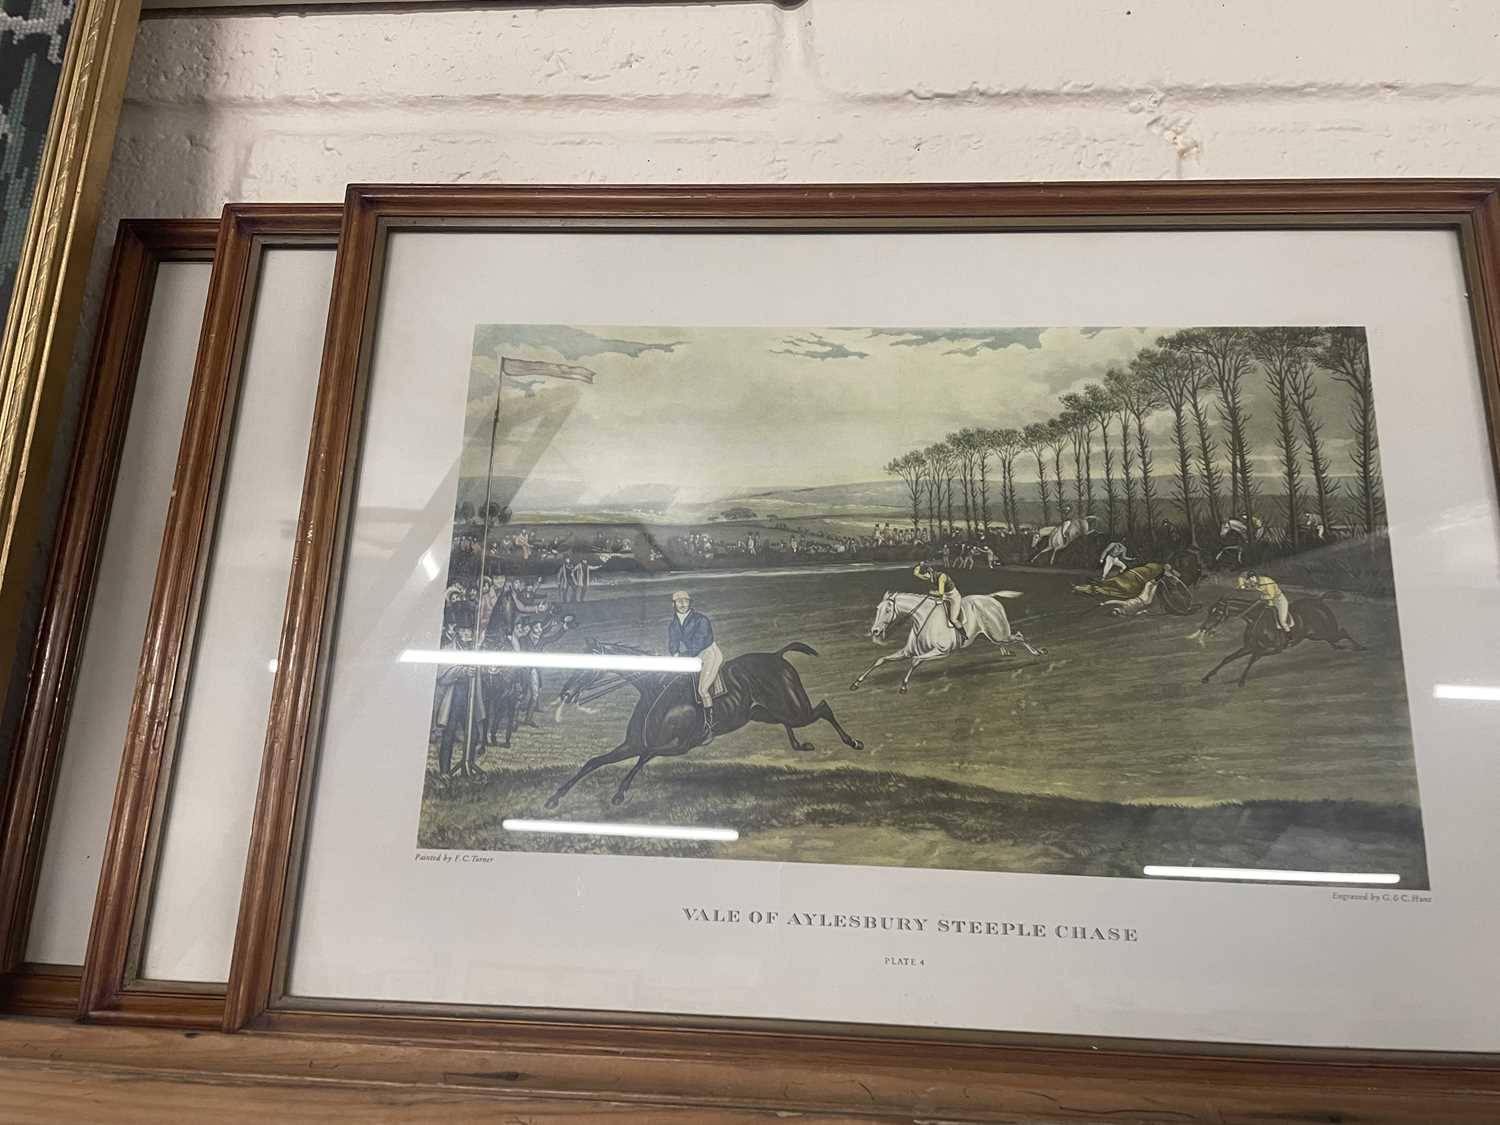 Four reproduction prints of the Vale of Asbury Steeplechase, engraved by G & C Hunt, framed and - Image 2 of 4